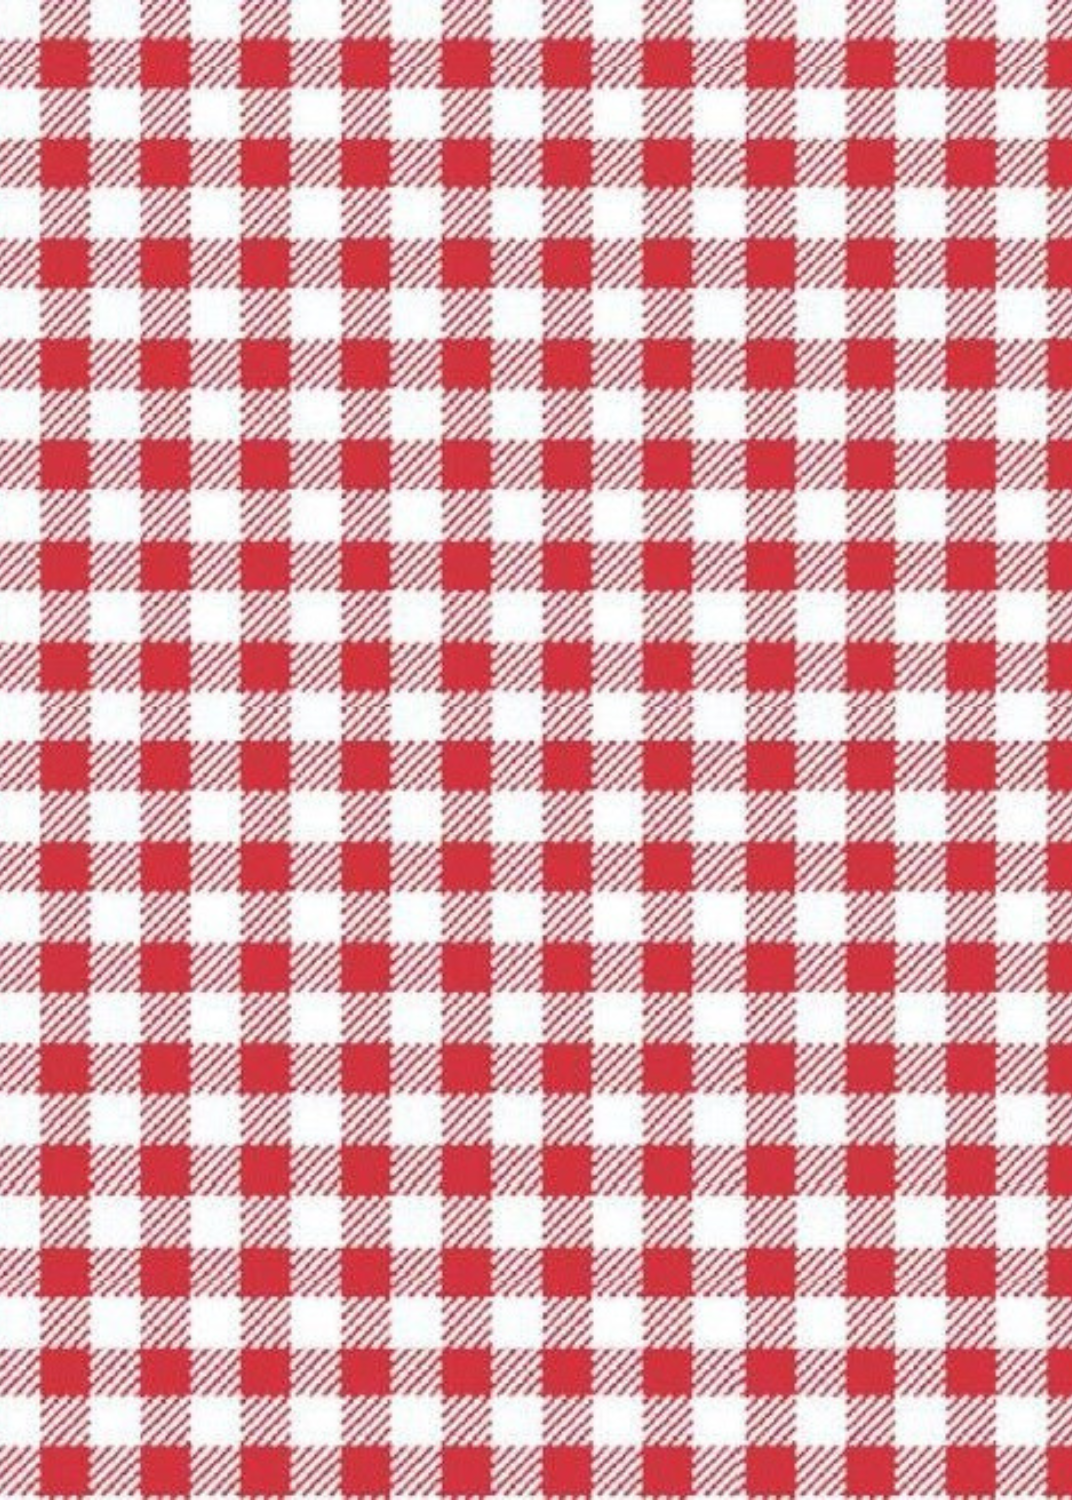 Cricket Sleeveless Top - Gingham Check Red/White